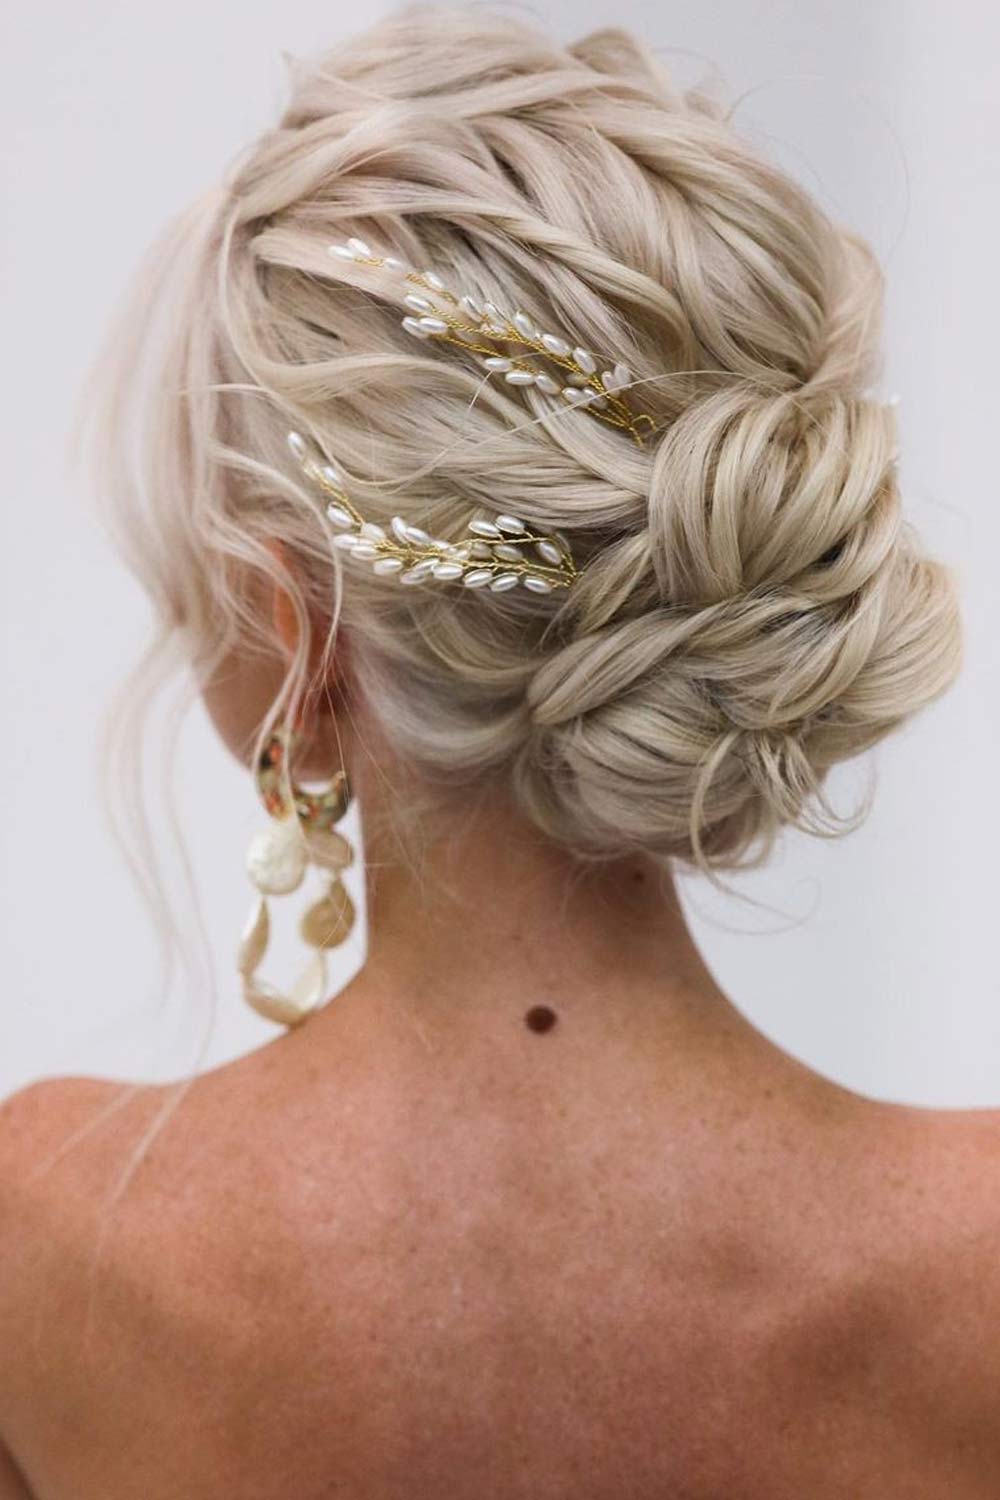 Voluminous Hair Updo with Accessory